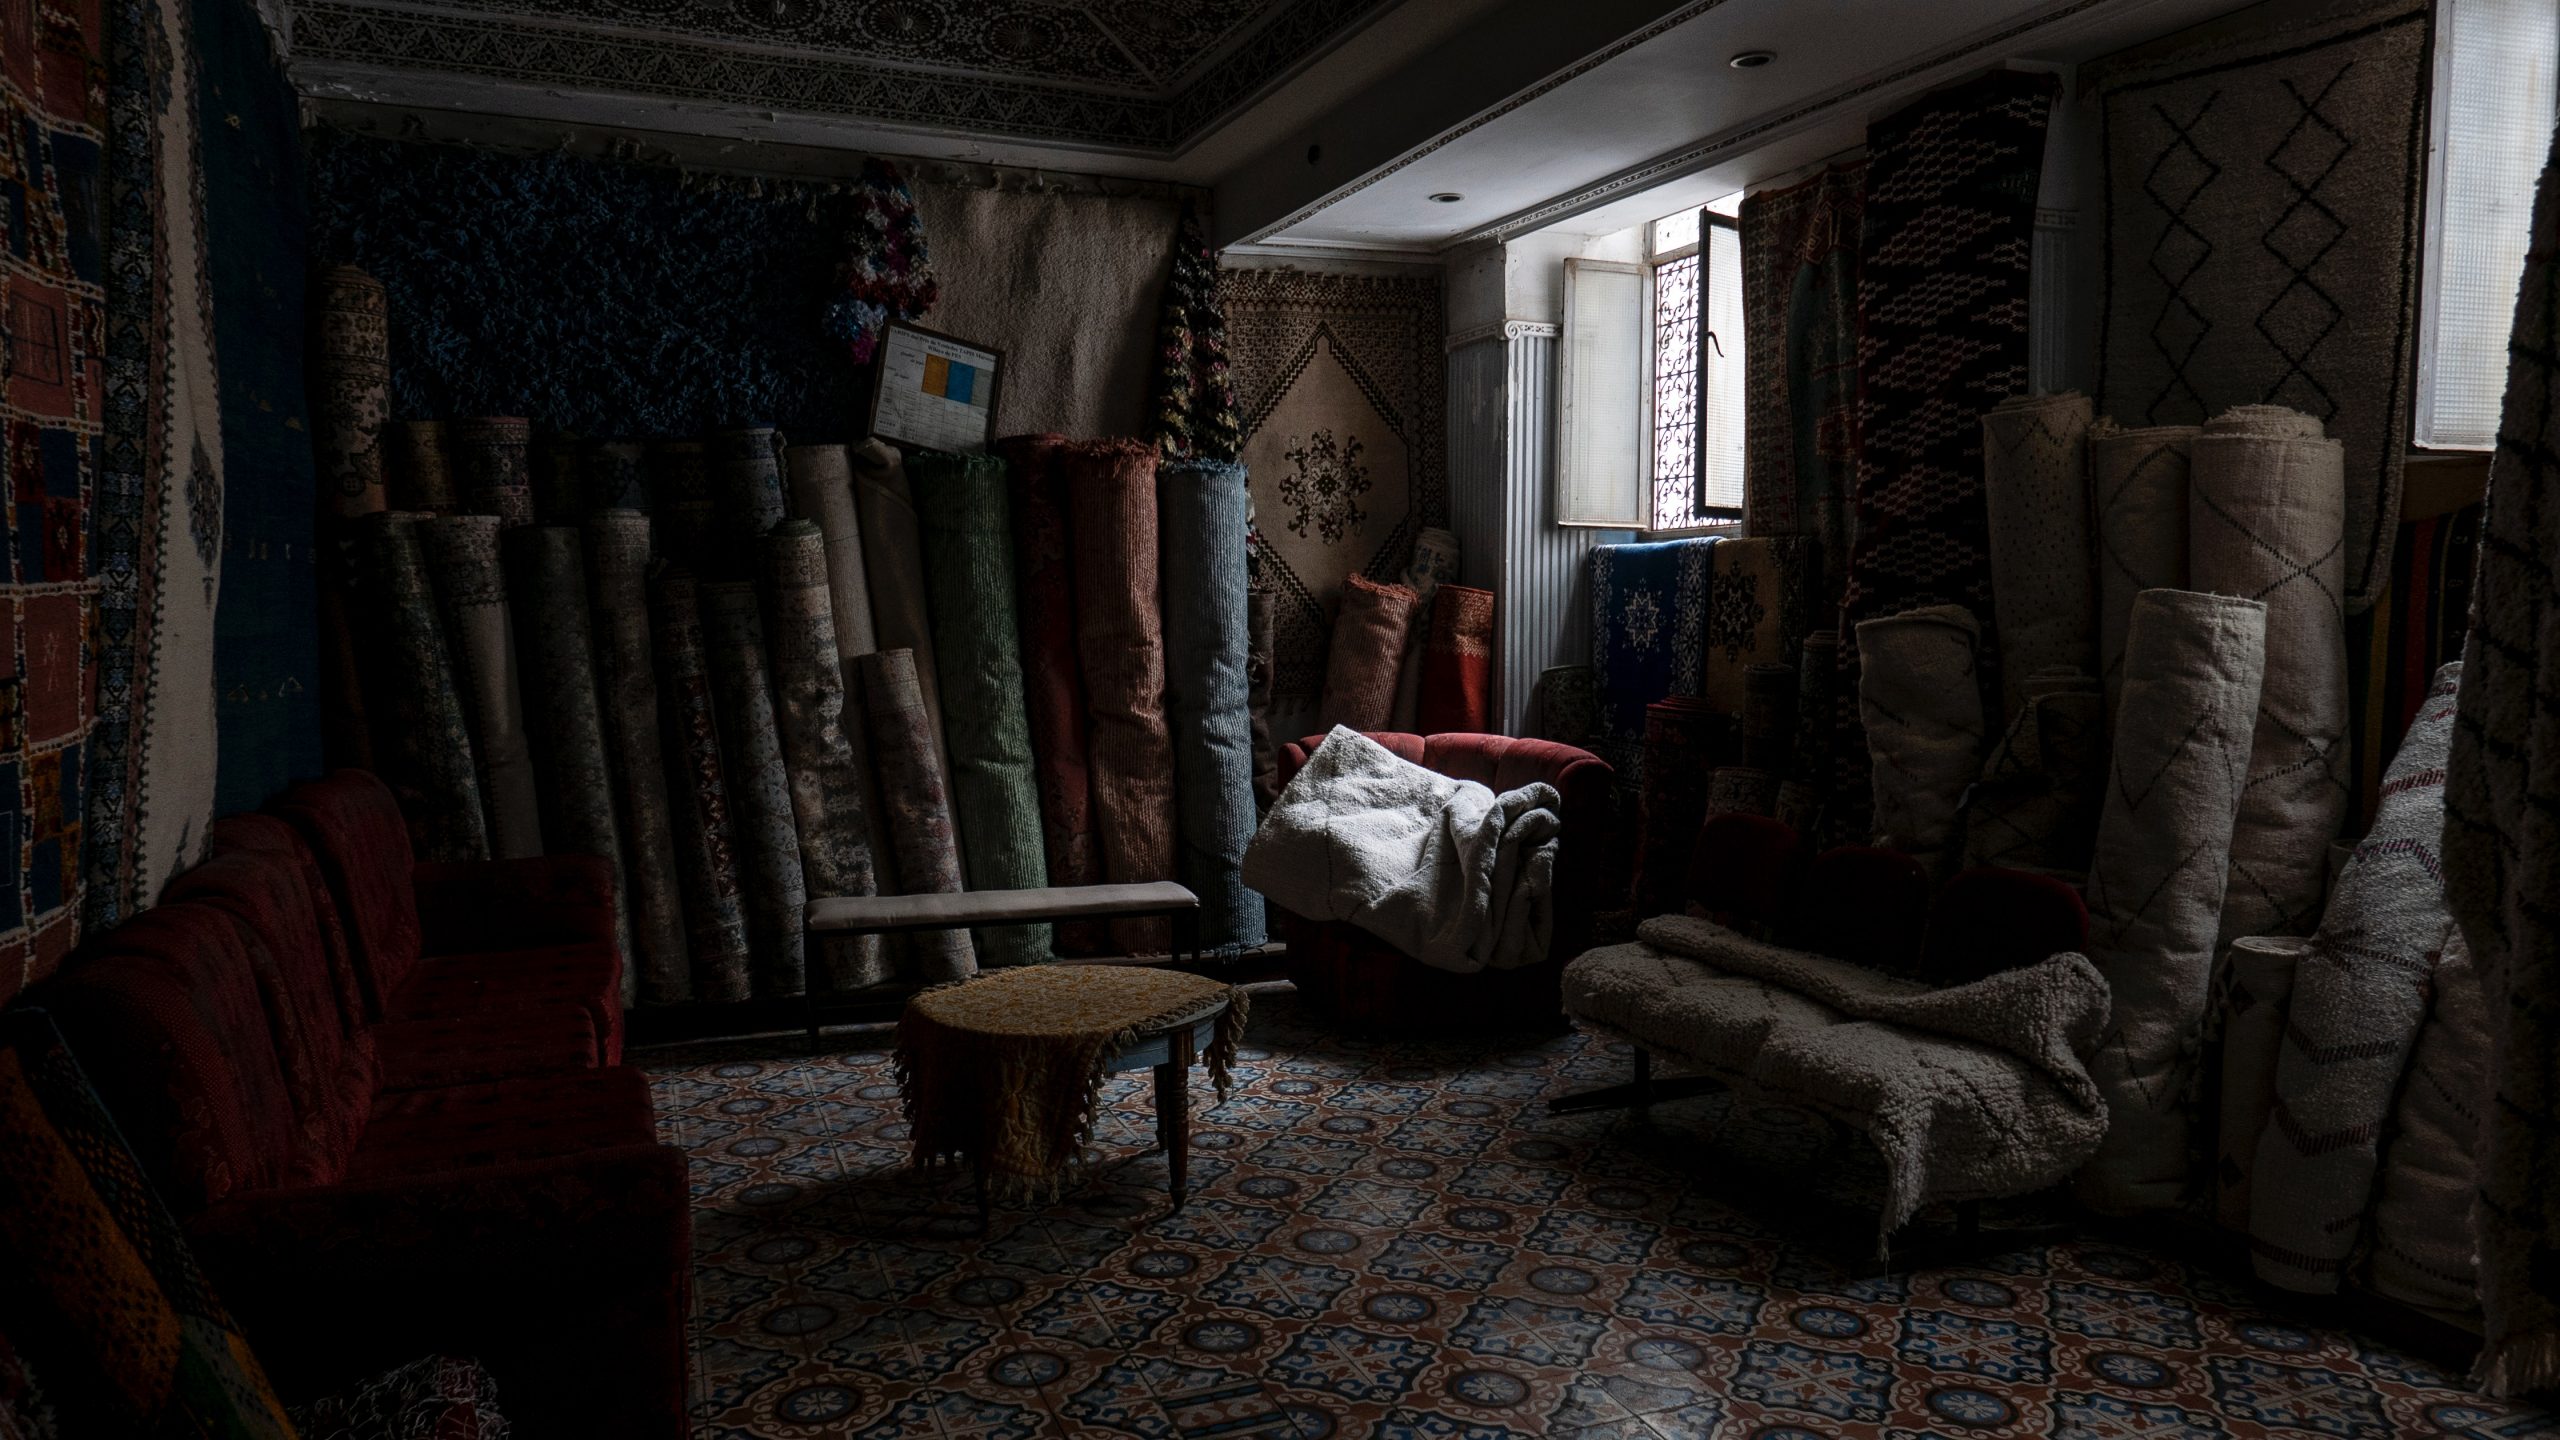 gallery image for Shared Carpet Shopping Tour Marrakech